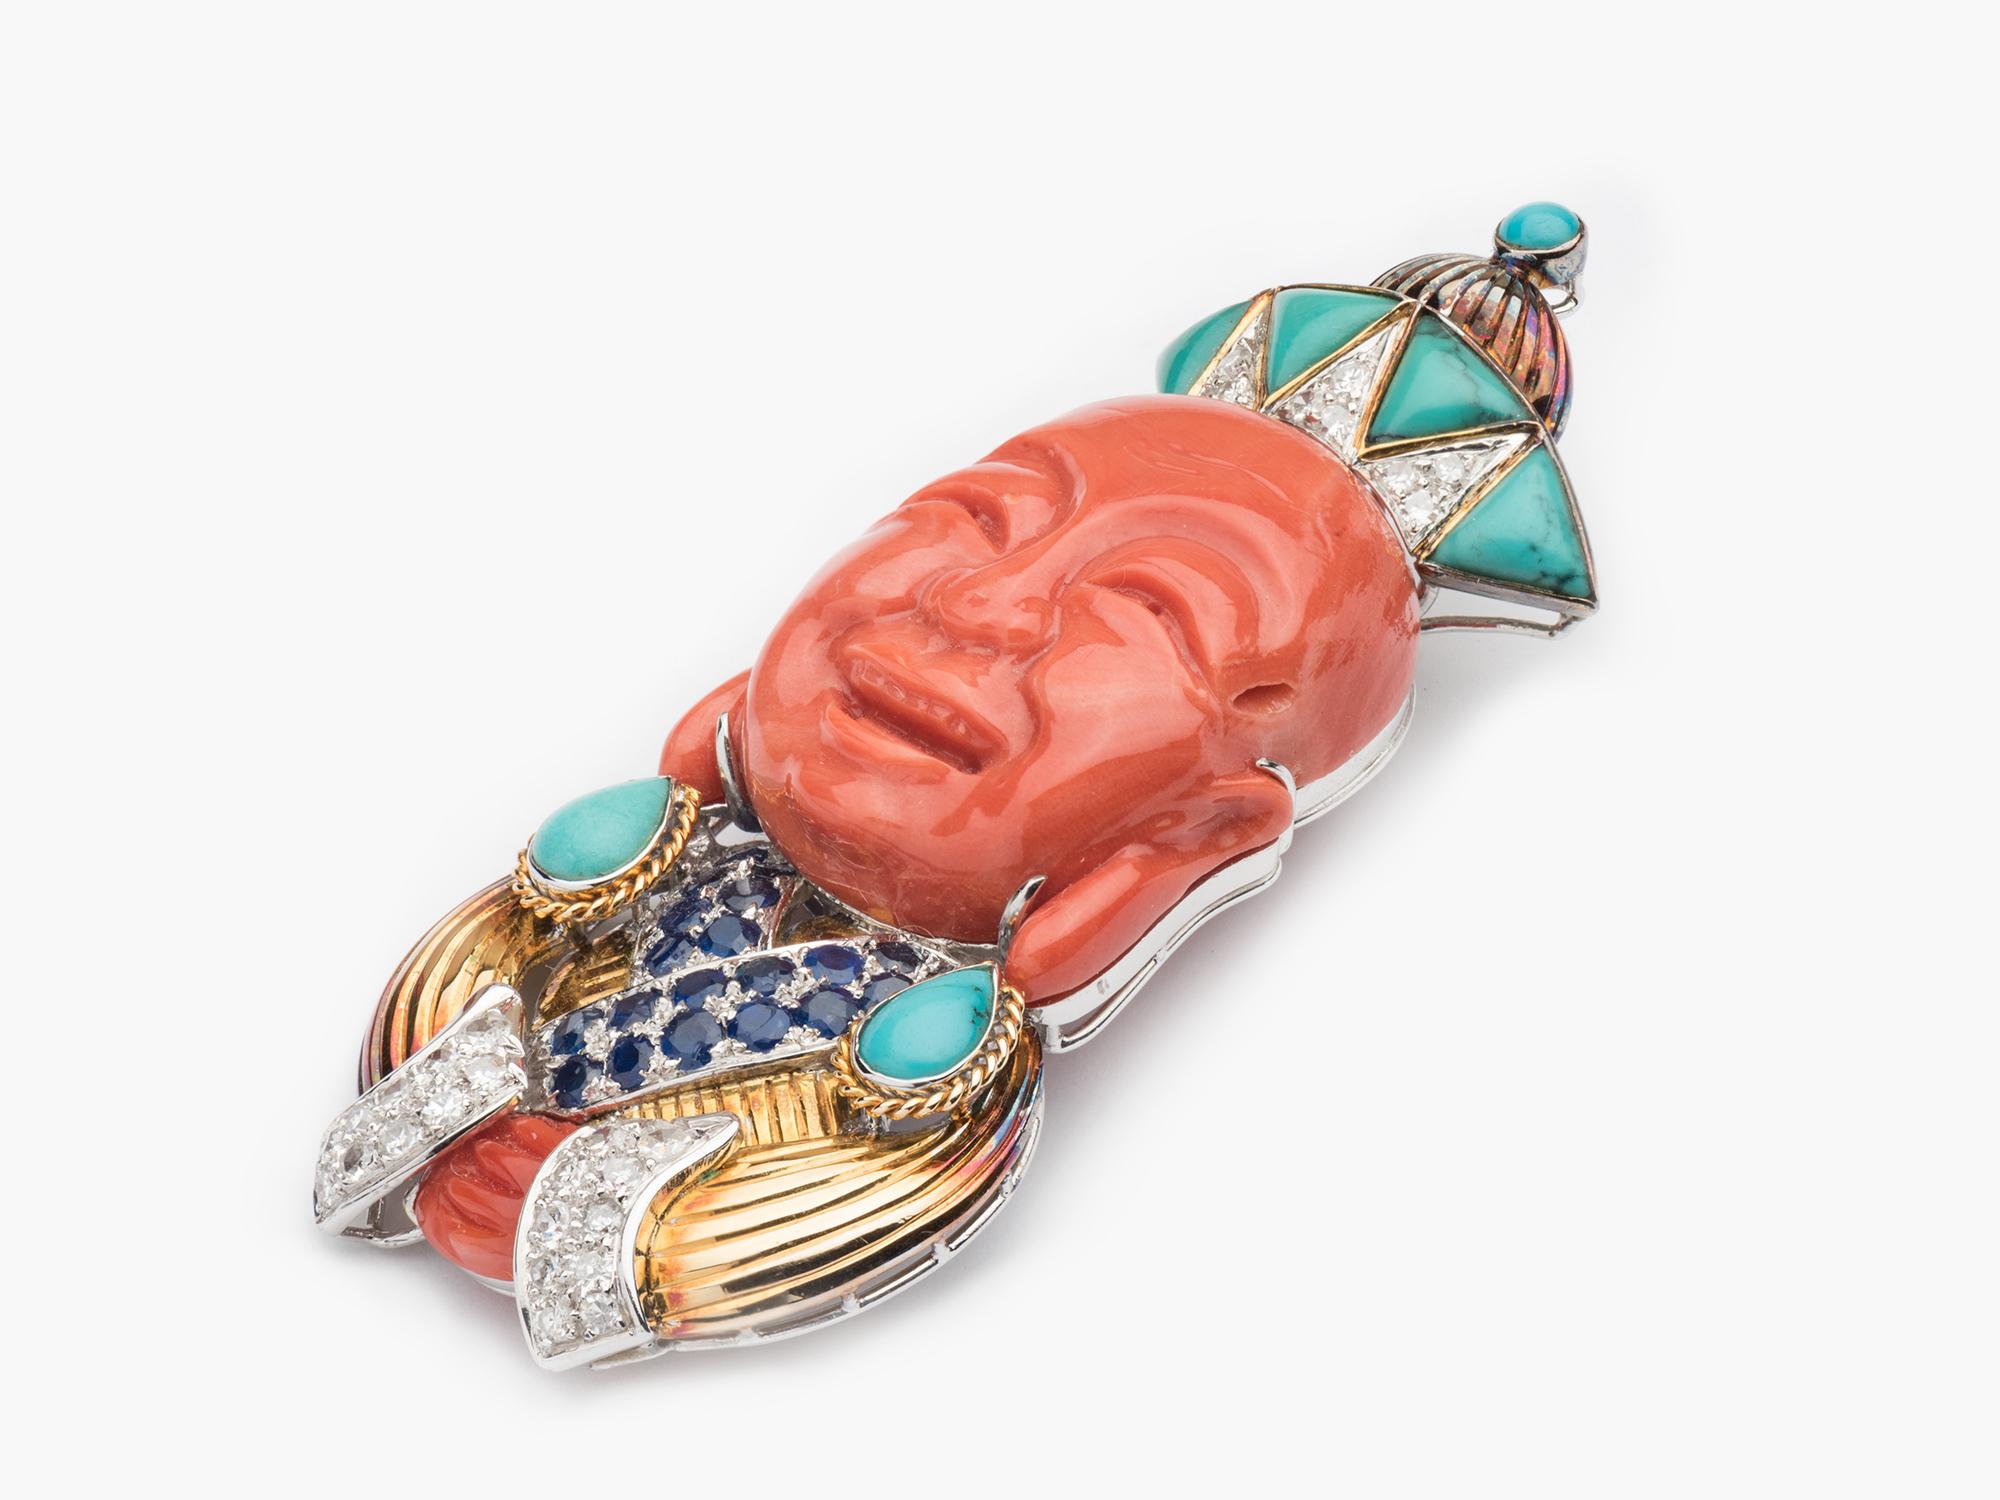 A laughing Buddha Clip Brooch with a carved Coral face accented with Turqouise, Sapphires and Diamonds set in 14k yellow and white gold.